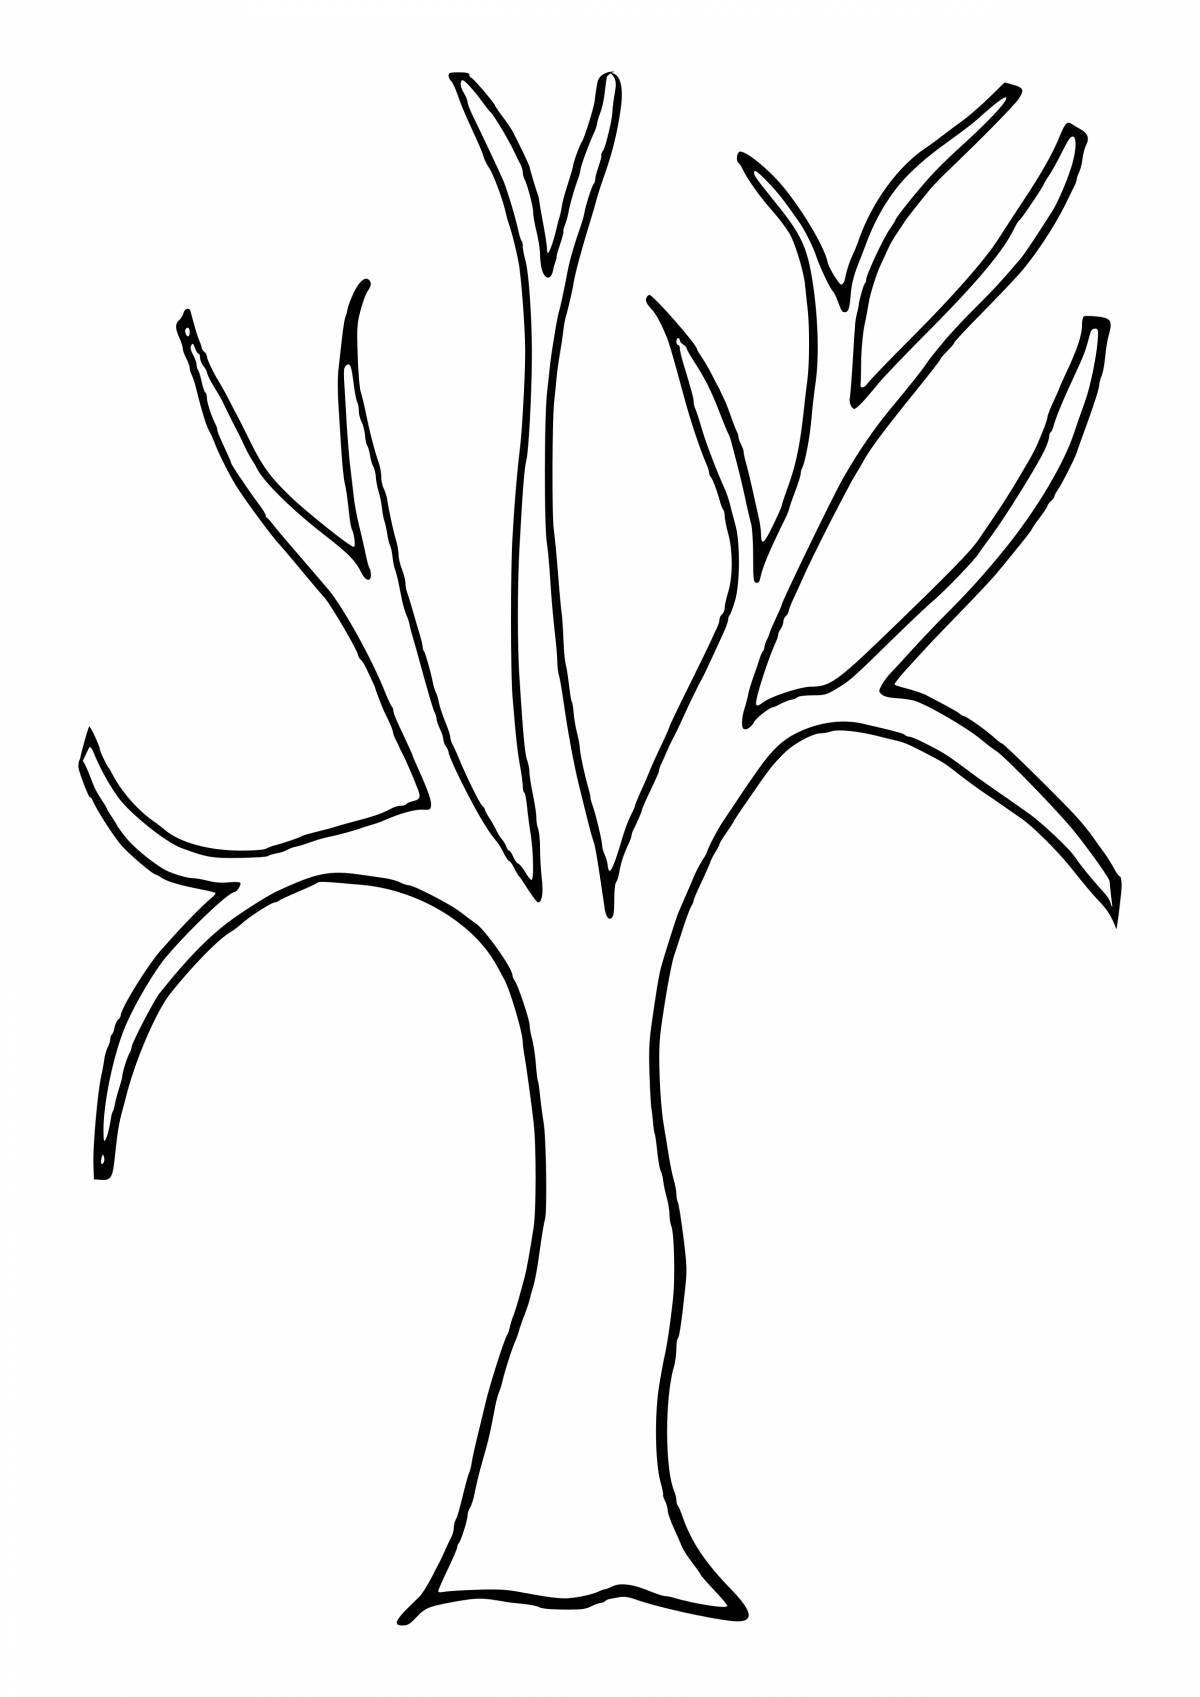 Tree without leaves outline #8